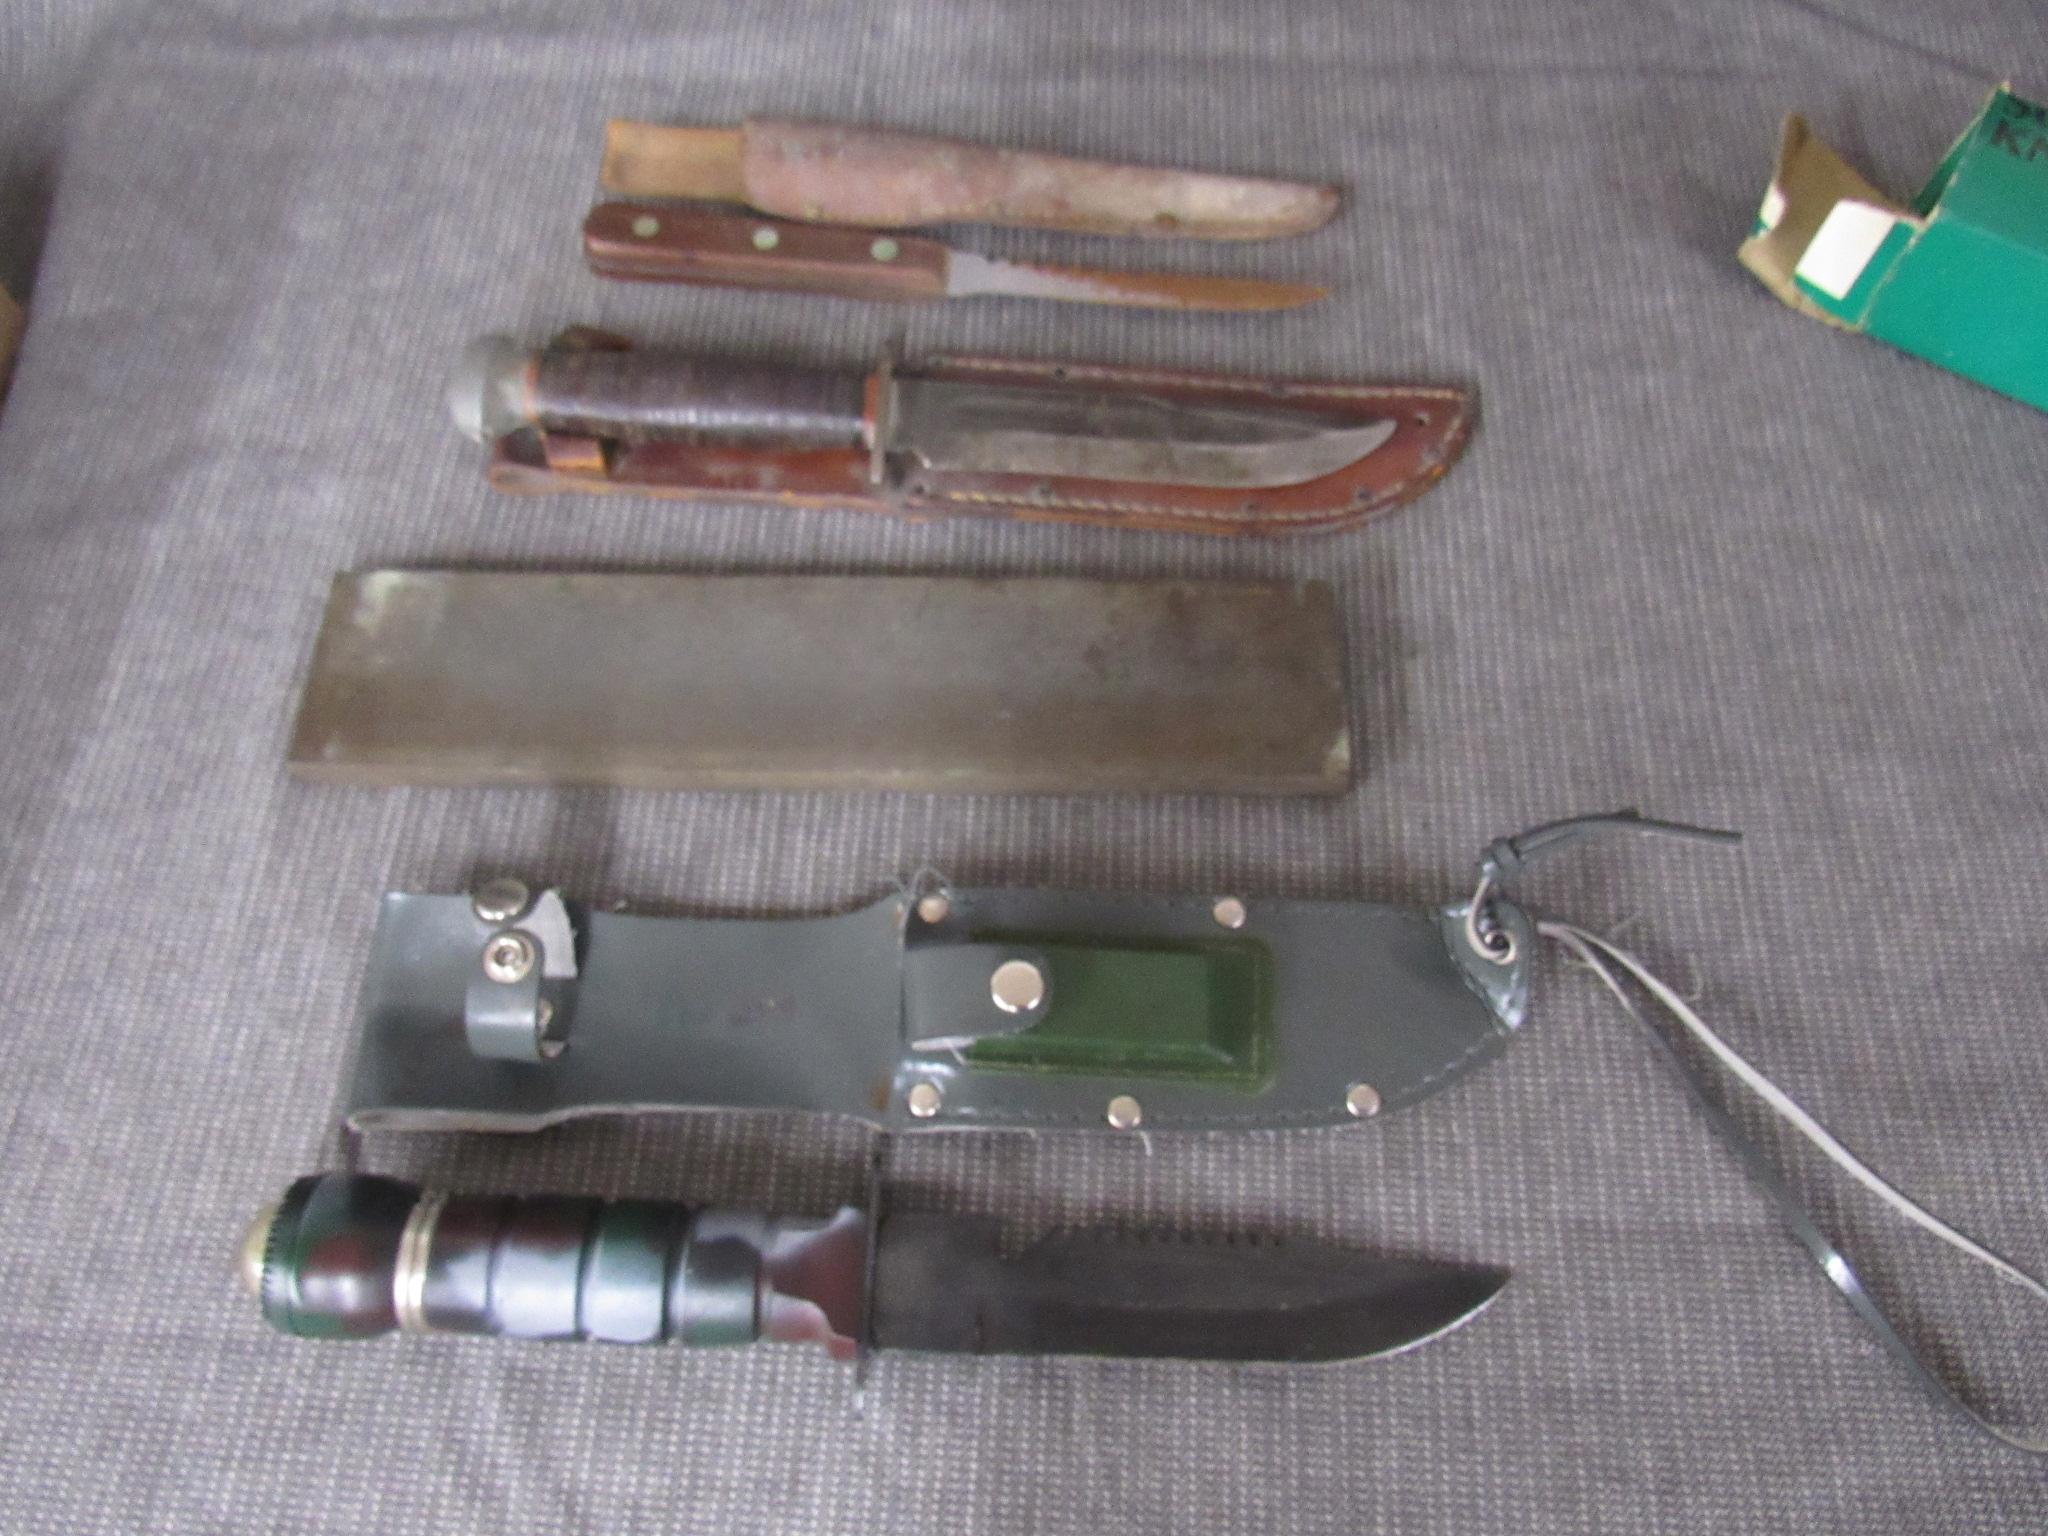 3 fixed blade knives and a sharpening stone.